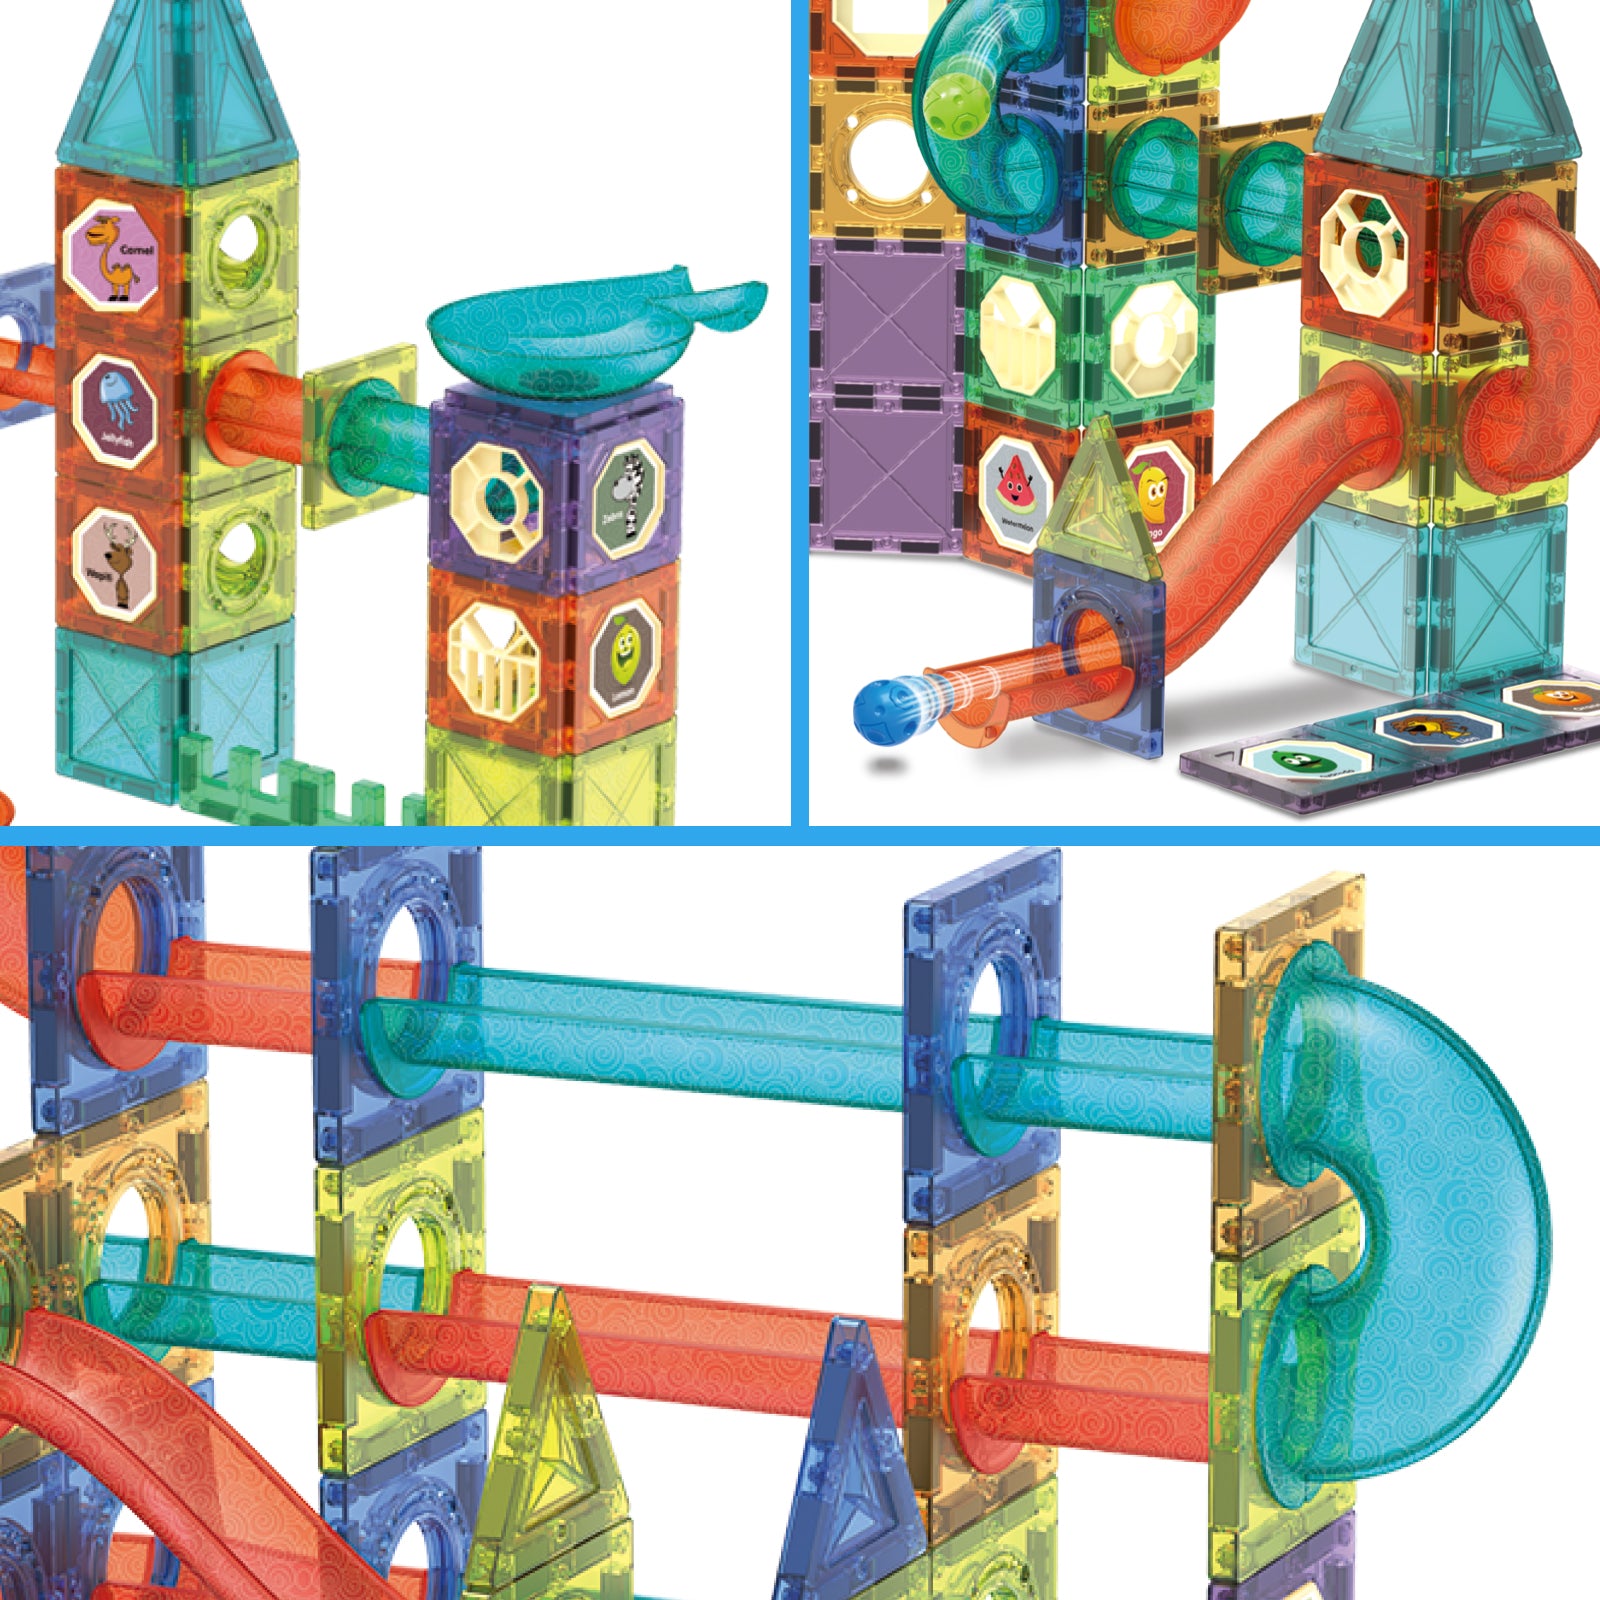 Contixo ST8 Magnetic Light-Up 3D Tiles Building Set – 110 Piece STEM Marble Run Blocks for Kids, Fun Educational Toy for Boys & Girls Ages 3-10+